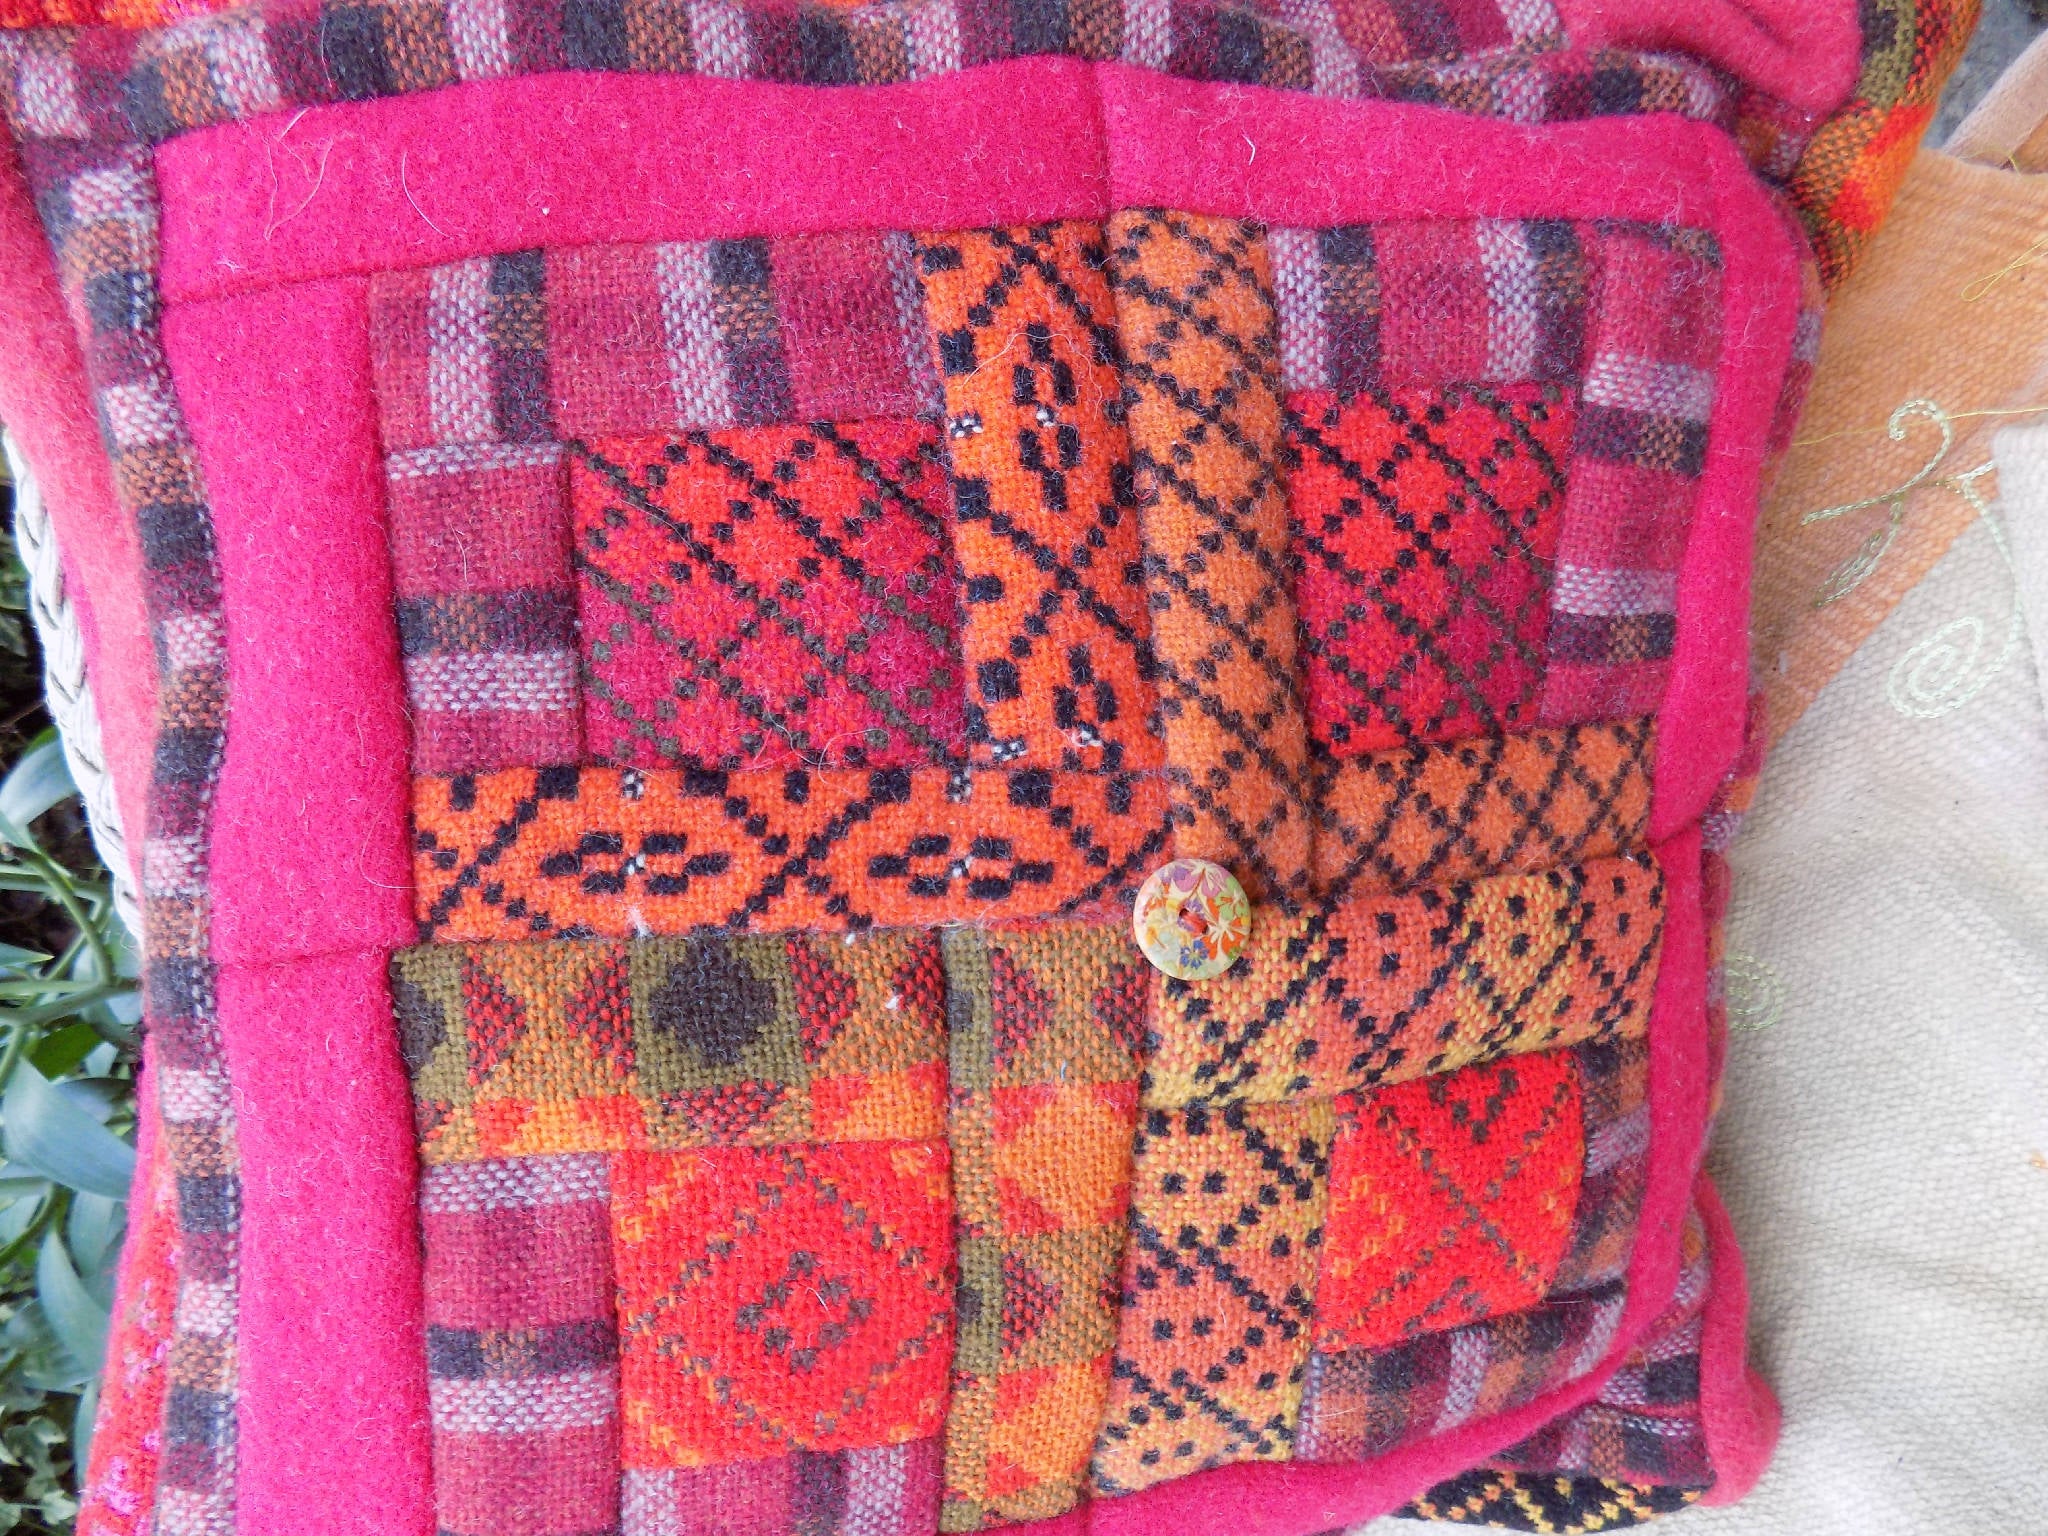 Patchwork cushion created from vintage and new Welsh Fabrics